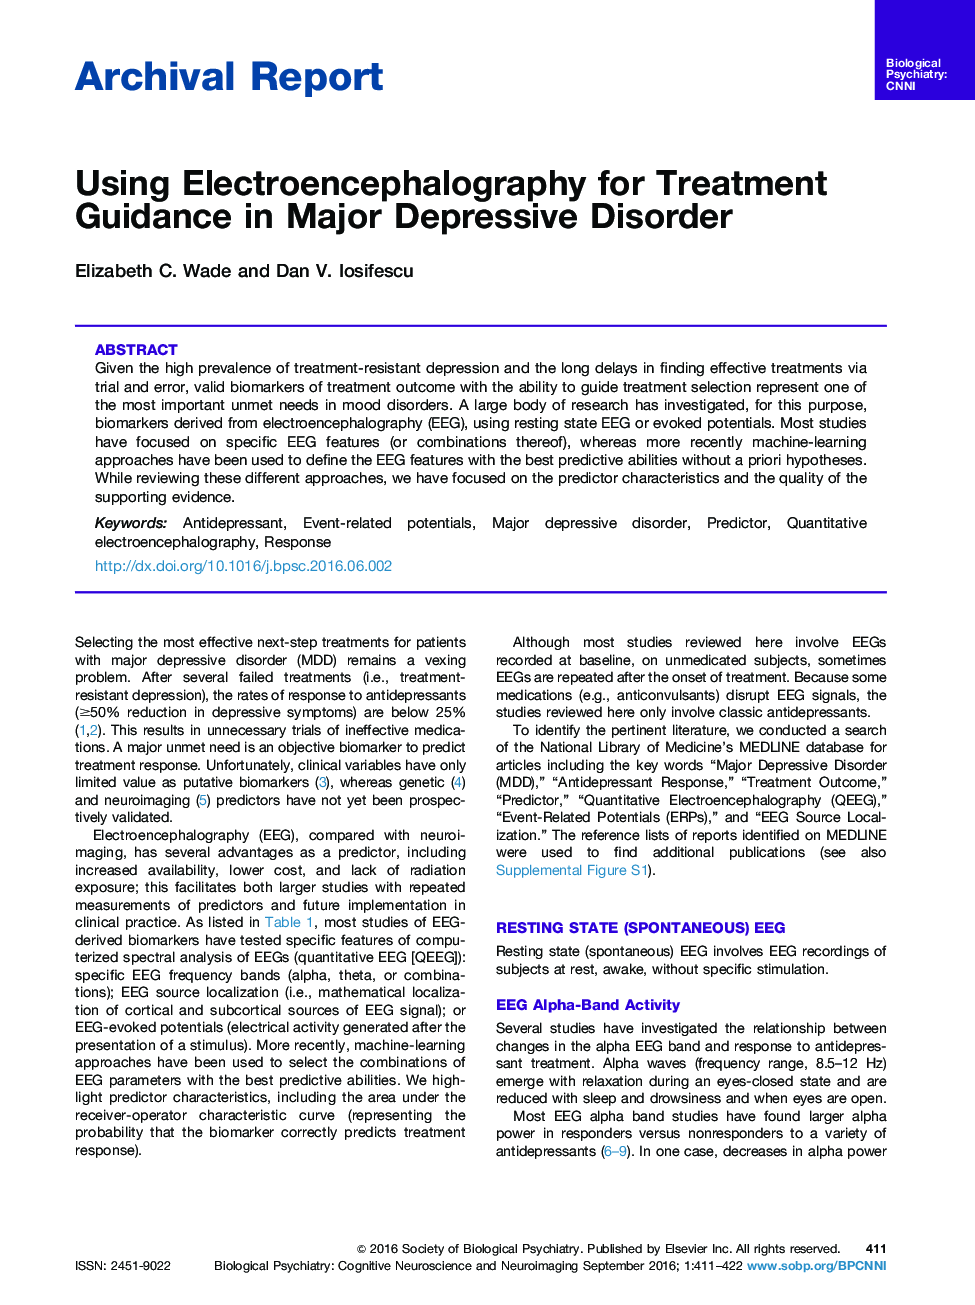 ReviewUsing Electroencephalography for Treatment Guidance in Major Depressive Disorder